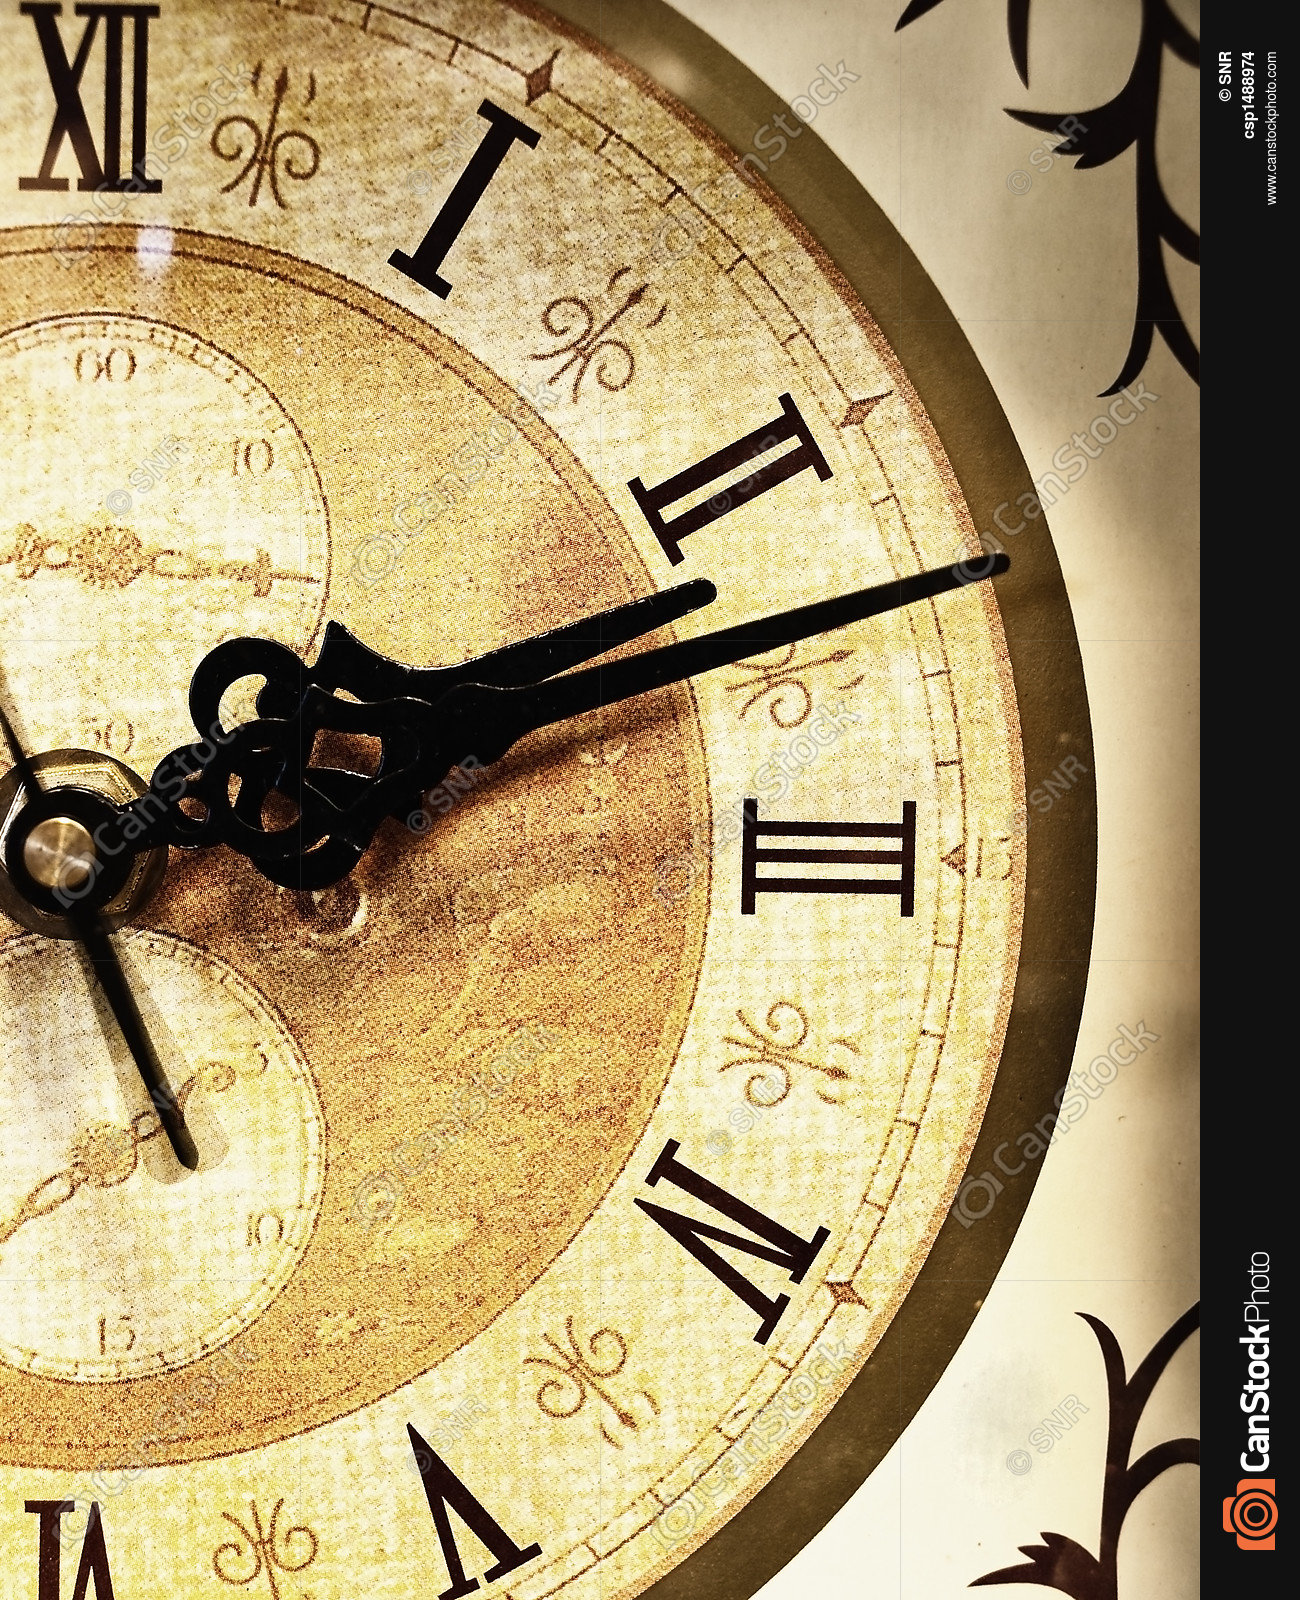 Photo of the half of old clock face stock photo - Search Photographs ...